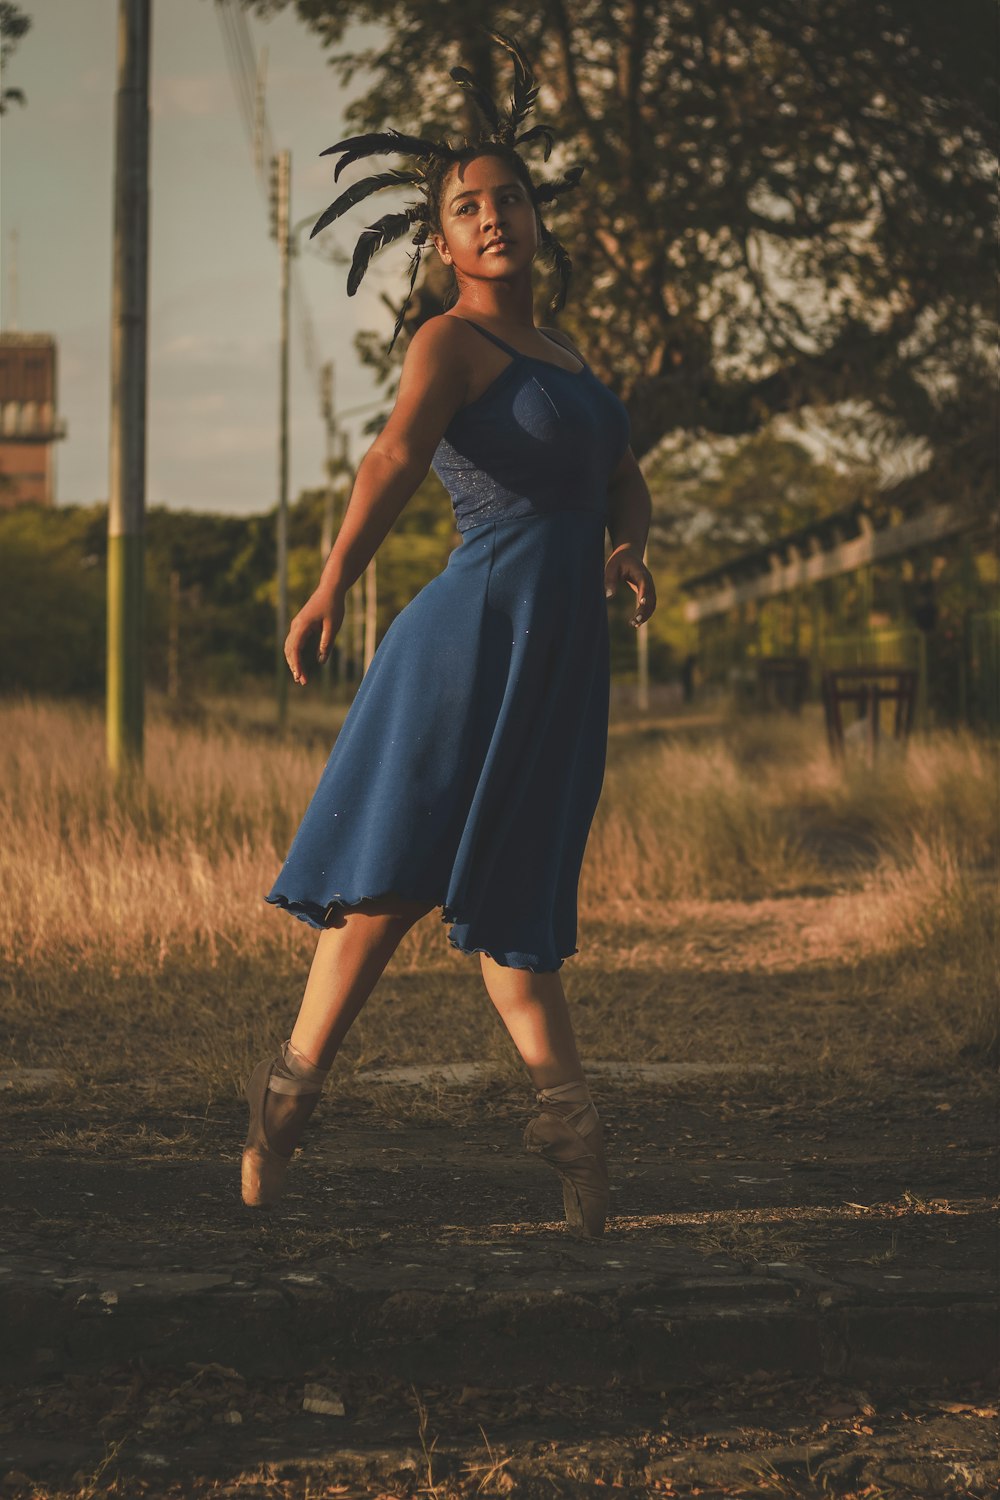 woman in blue dress walking on road during daytime